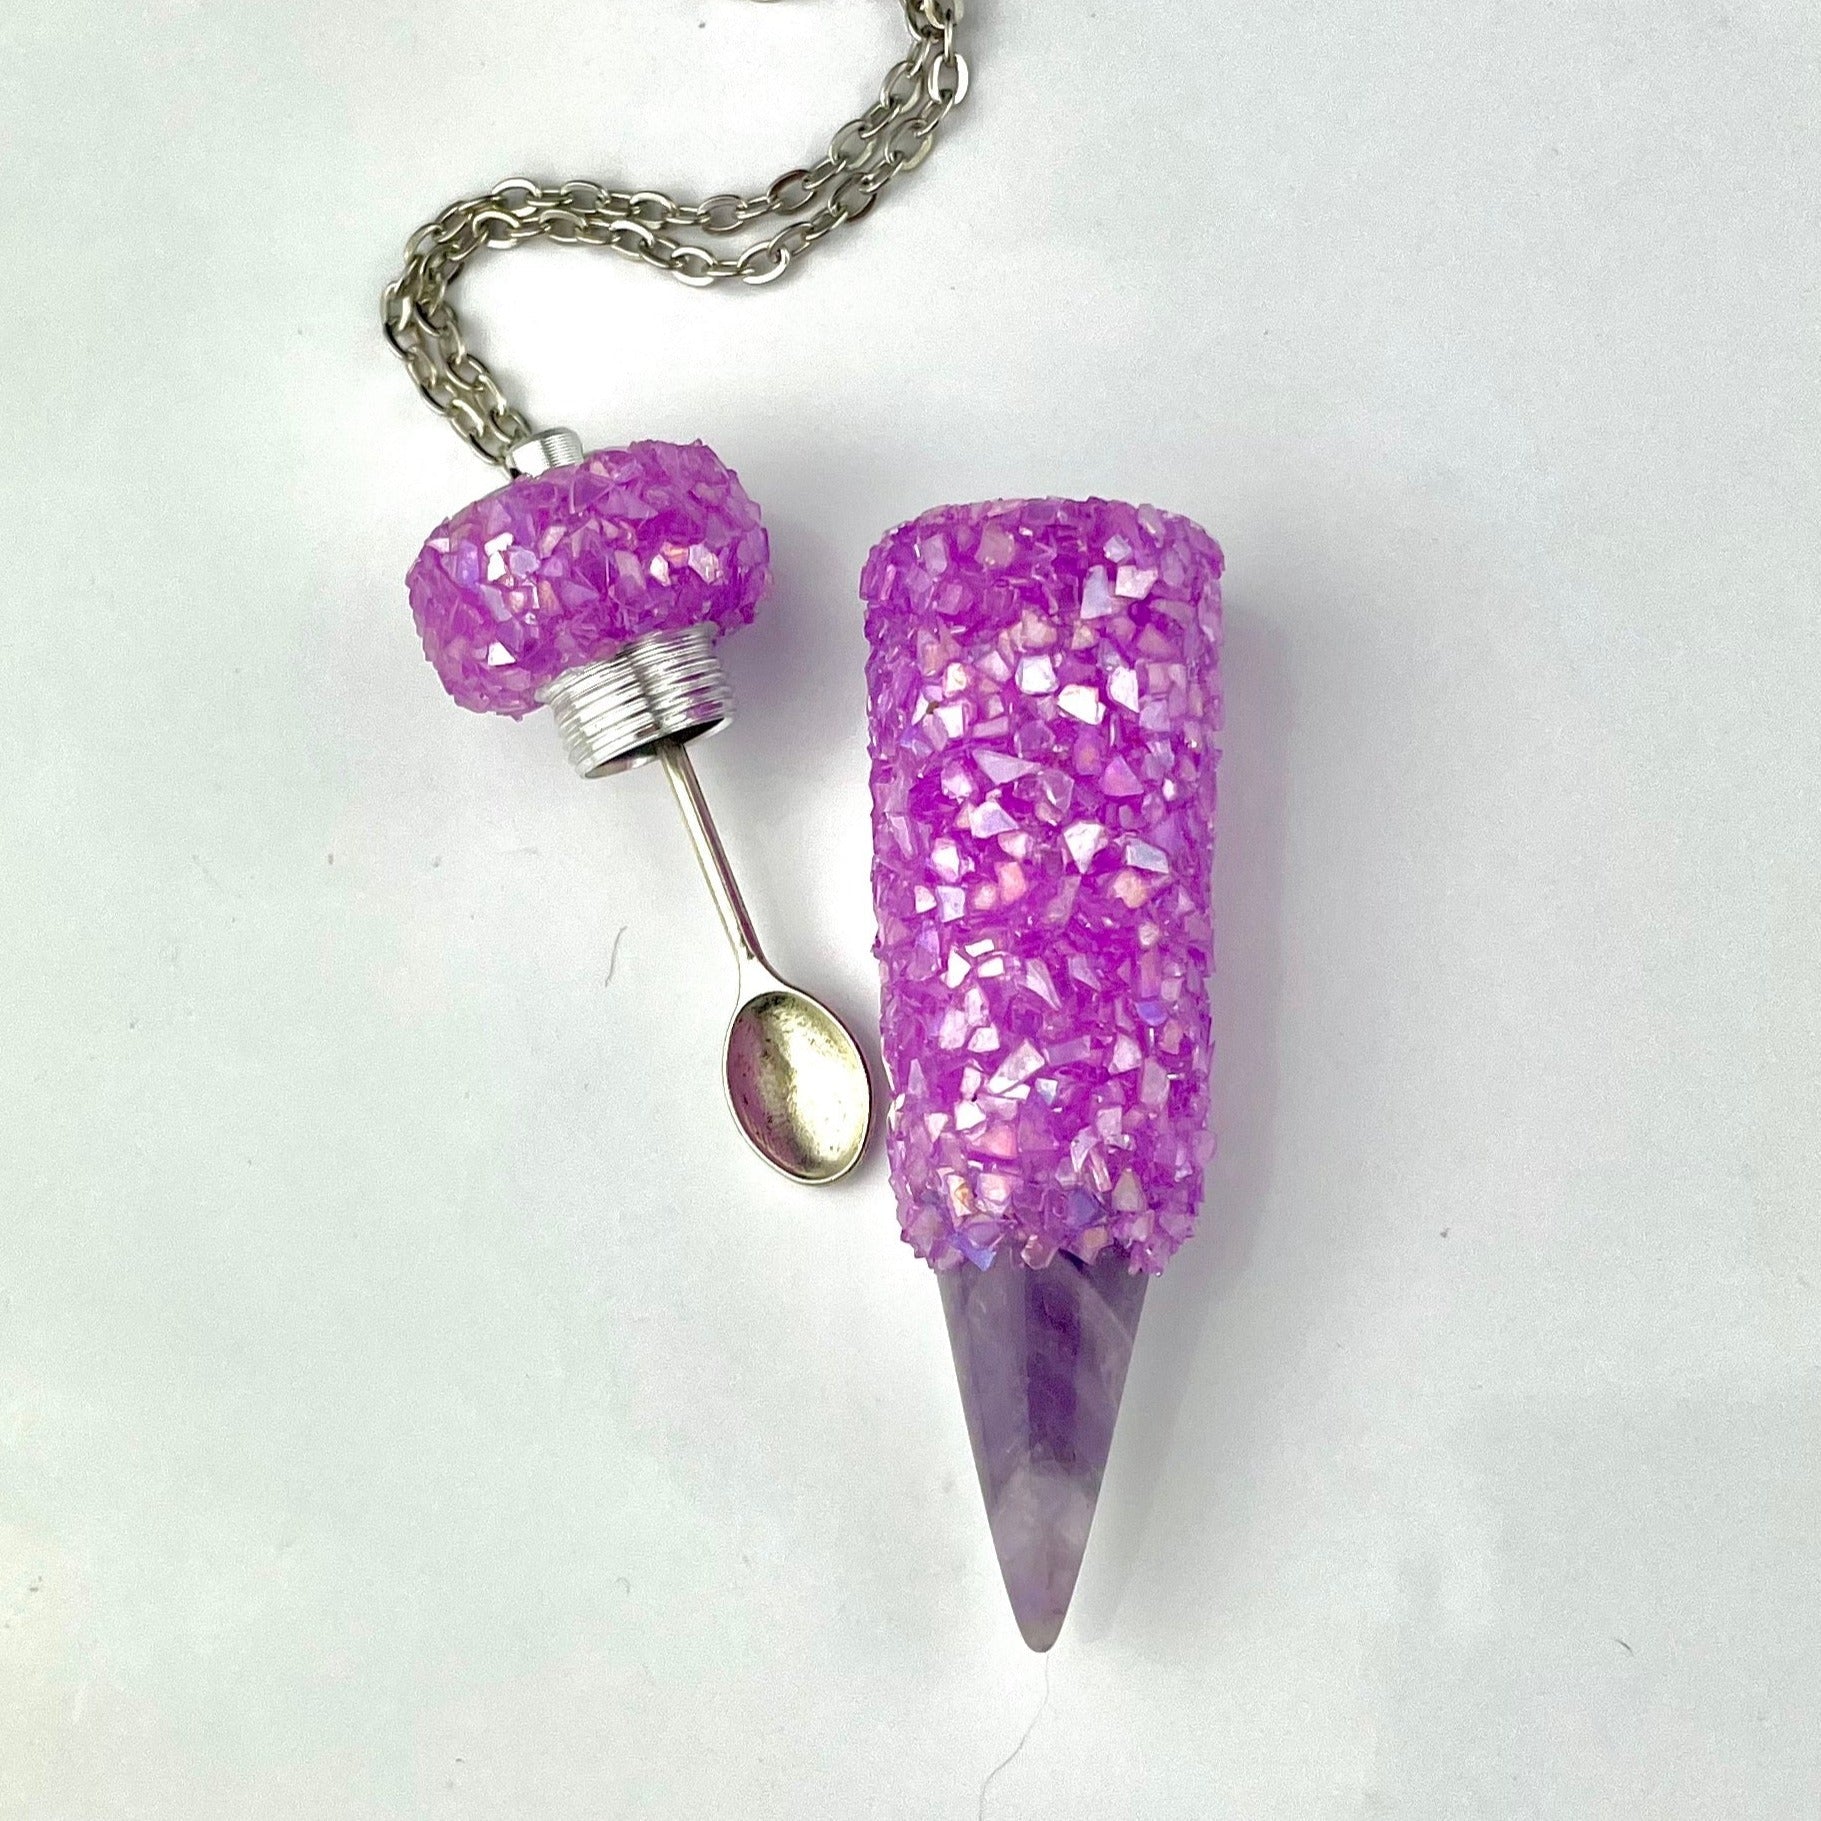 Crystal Stash Necklace with Spoon